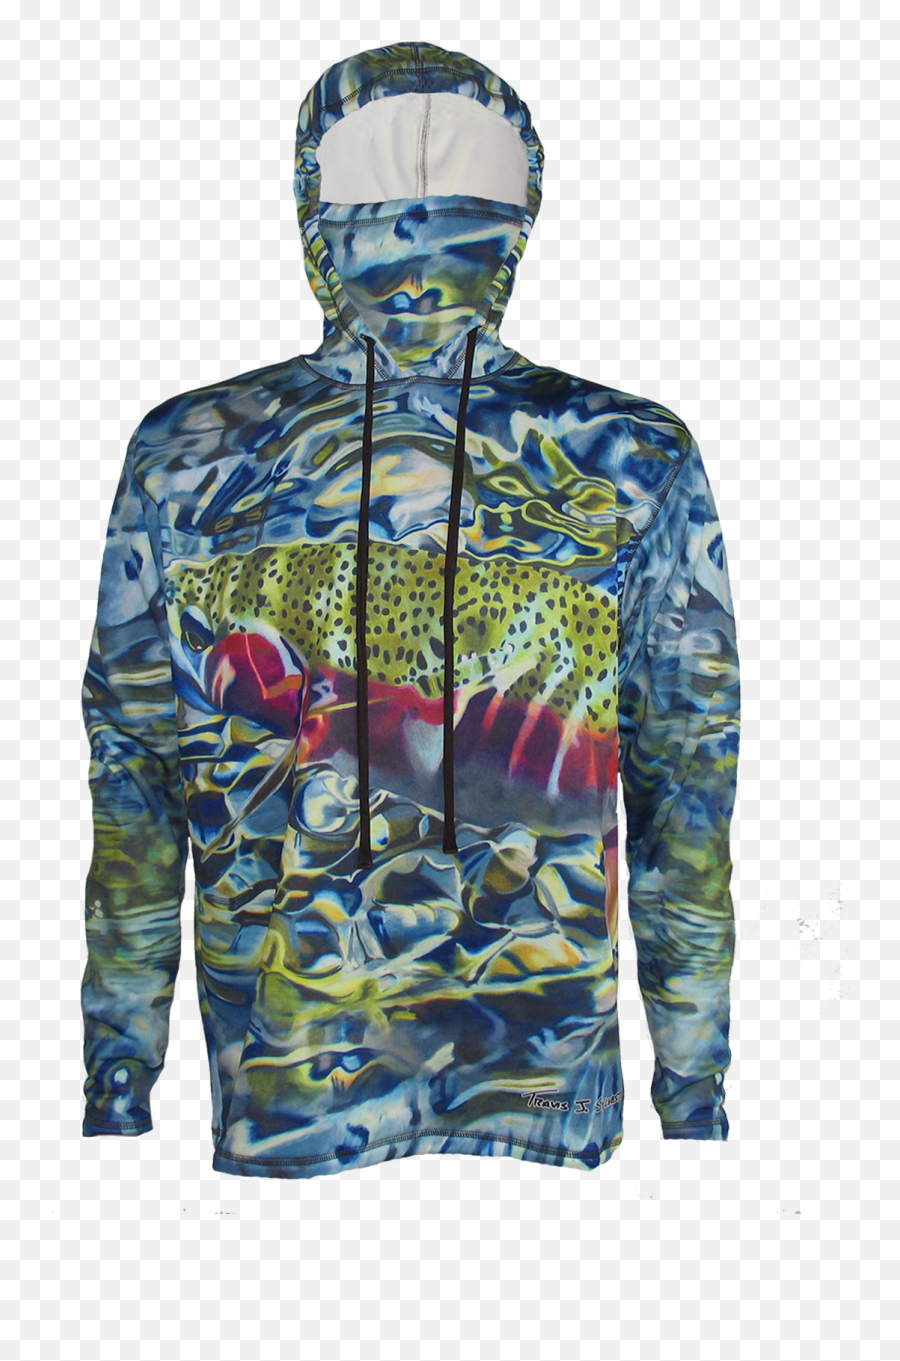 Tranquility Fishing Hoodies Emoji,Trout Fish Emoticon Copy And Paste